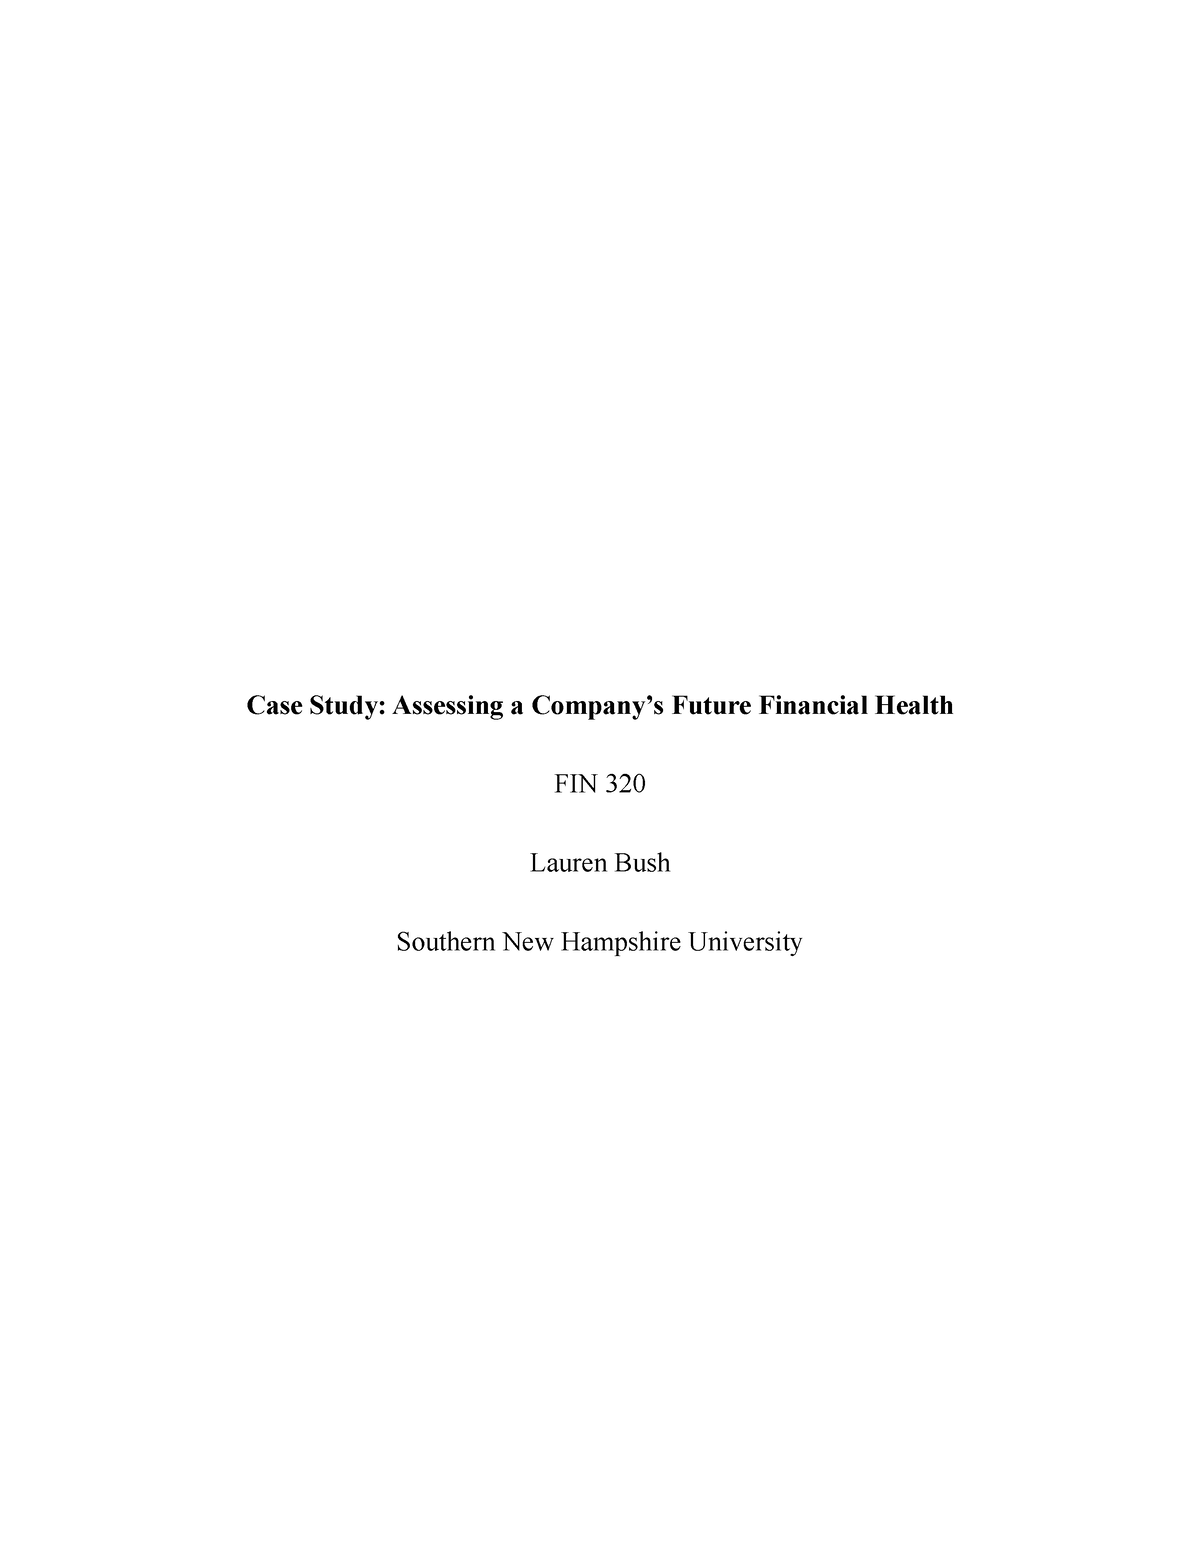 4 2 case study assessing a company's future financial health